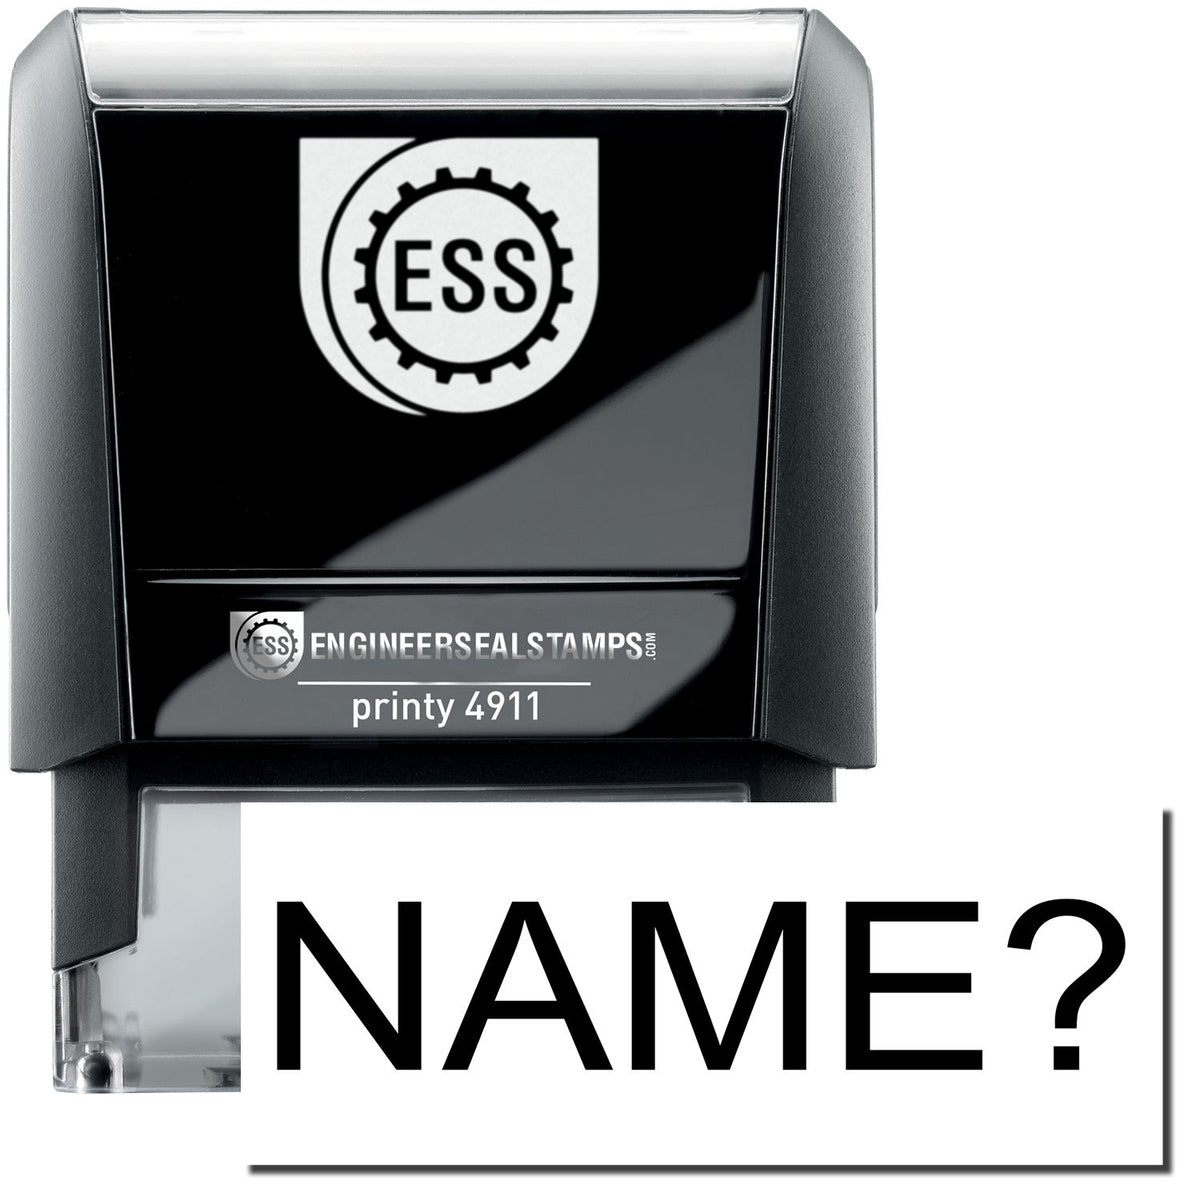 A self-inking stamp with a stamped image showing how the text &quot;NAME ?&quot; is displayed after stamping.